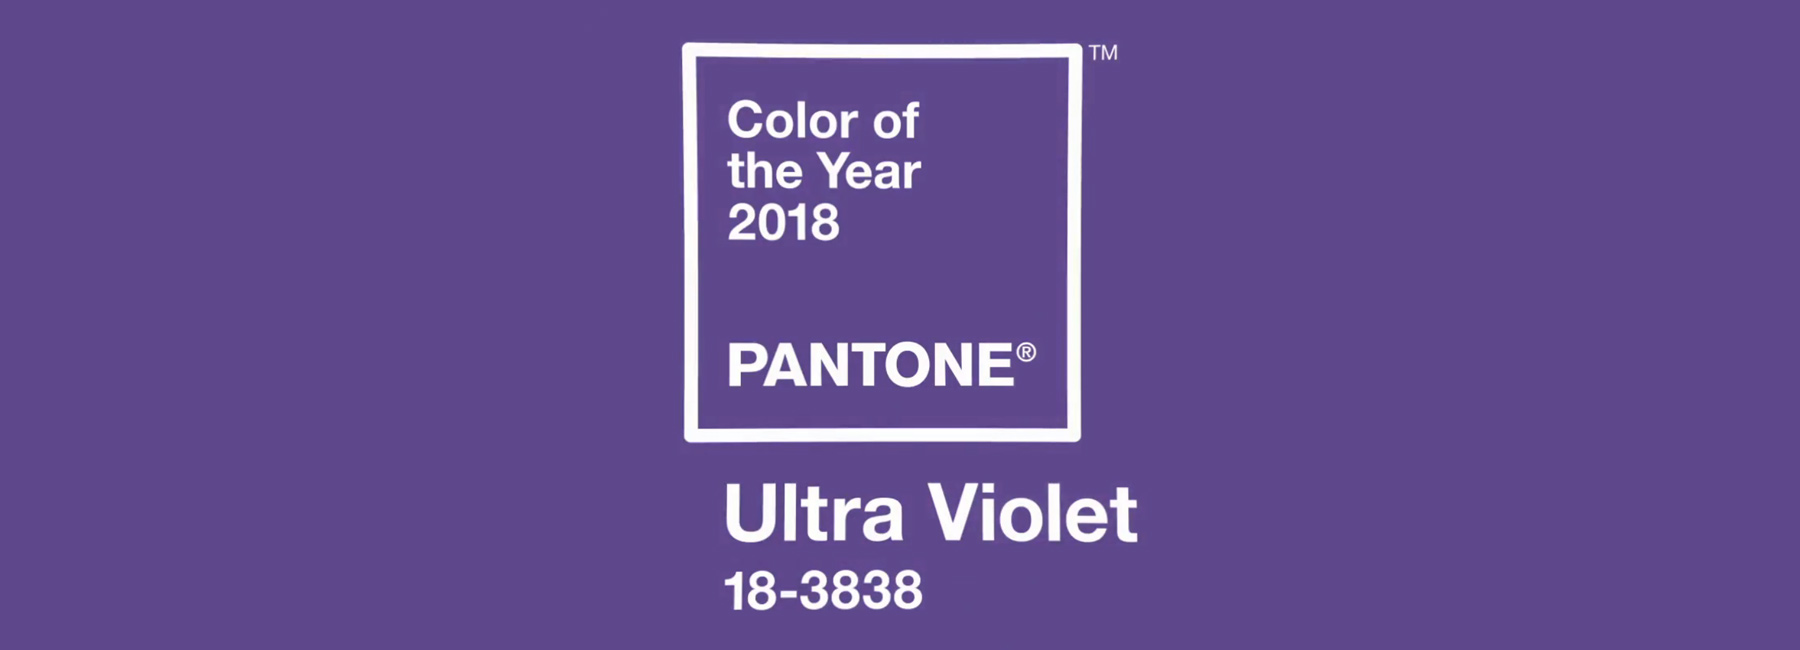 pantone-color-of-the-year-2018-ultra-vio